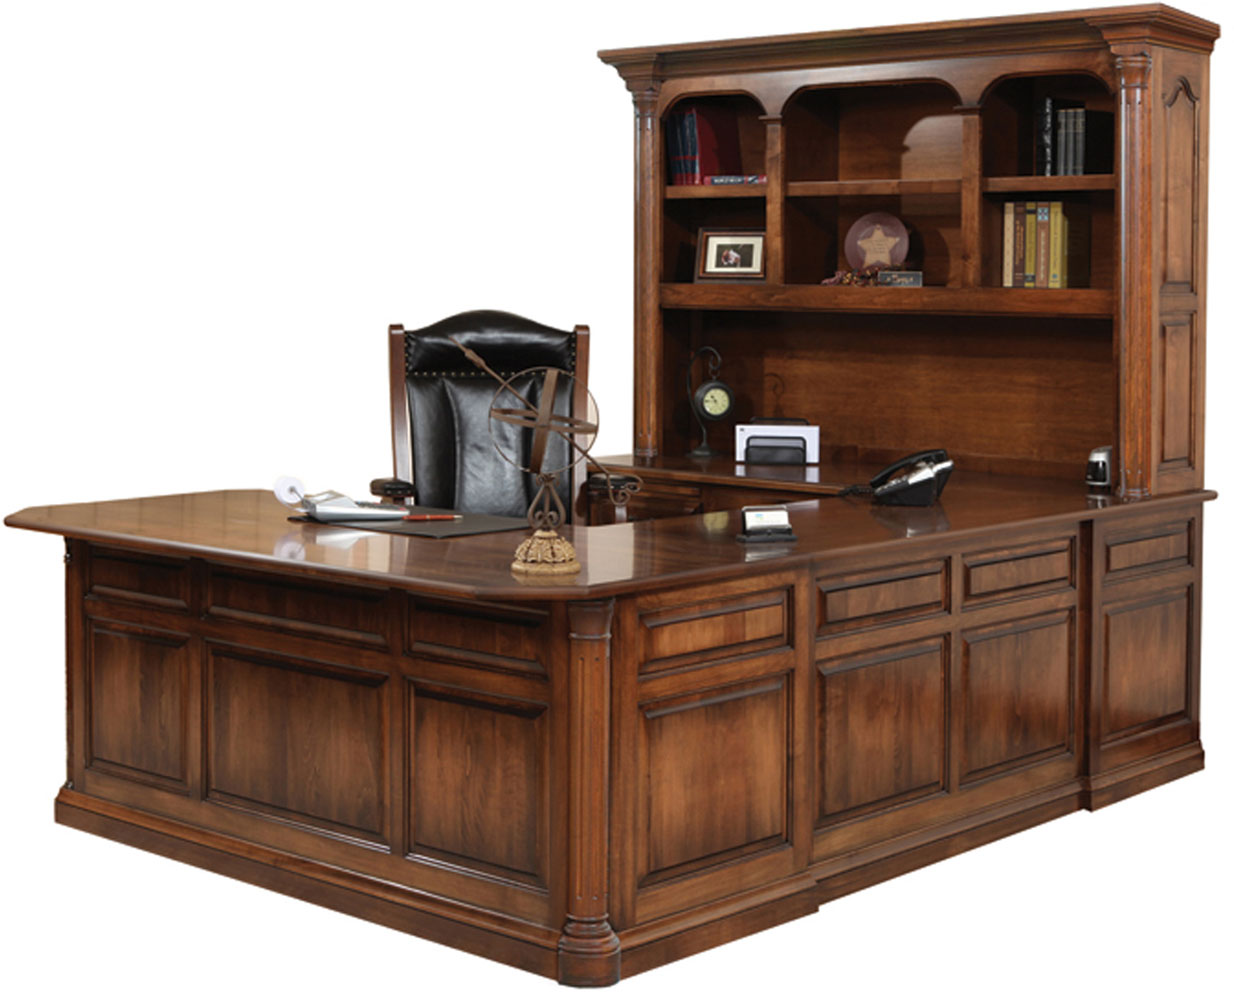 Jefferson Series U-Shape Desk and Hutch   (Sold Separately) shown Cherry with FC 9090 Chocolate Spice Stain.